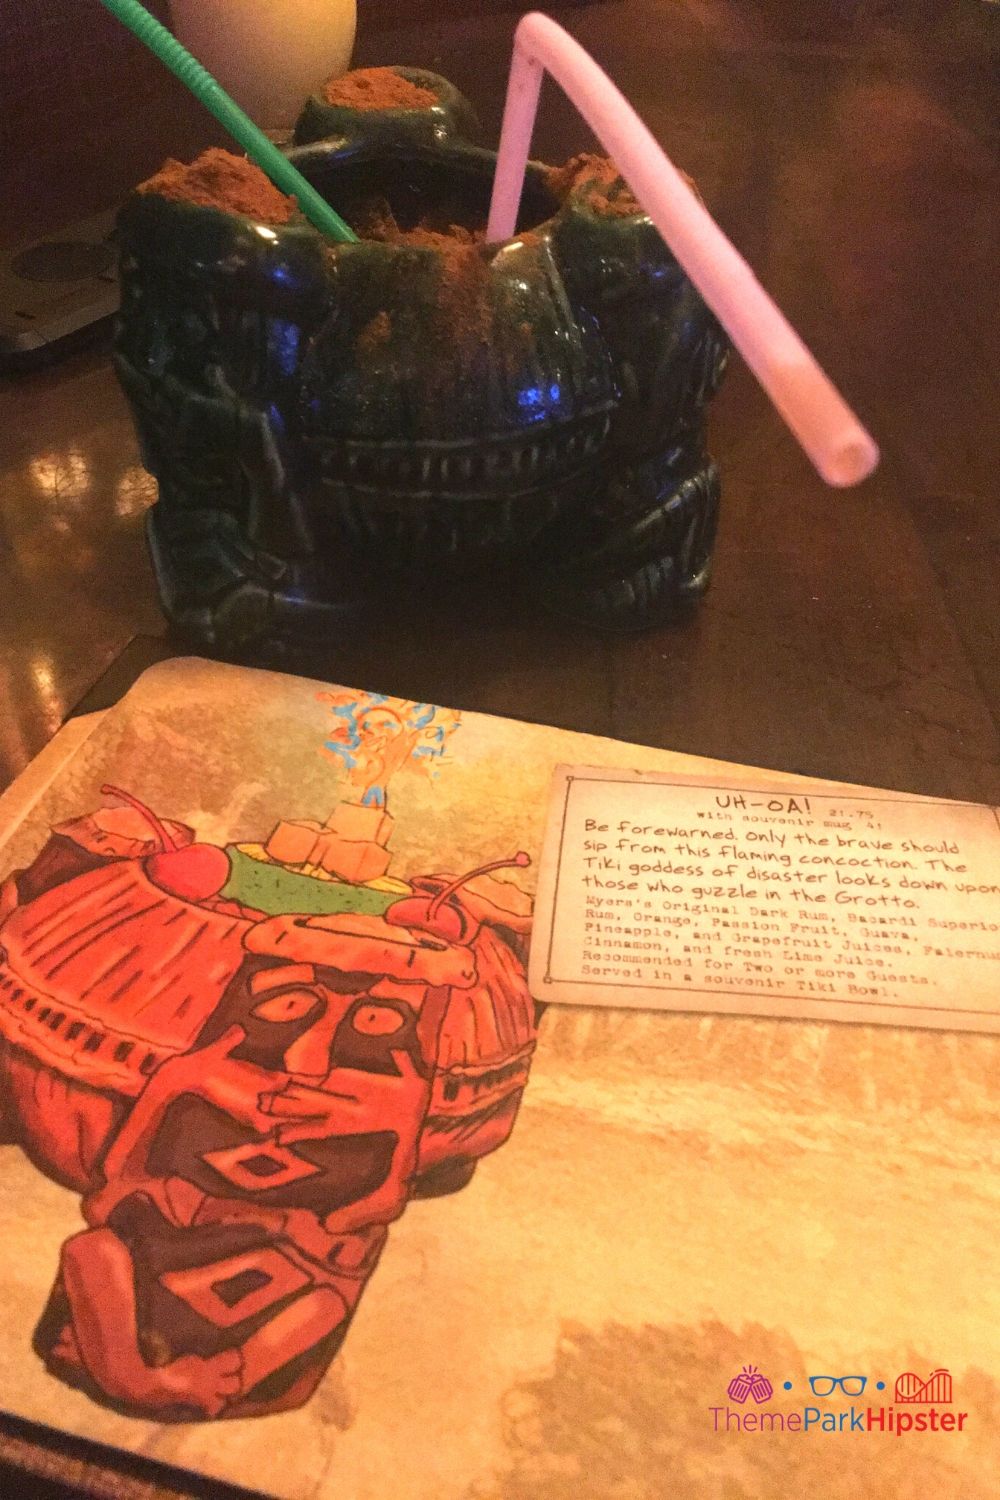 Trader Sams Grog Grotto Uh Oha Cocktail. Keep reading to learn about the Best Alcoholic Drinks at Disney World.